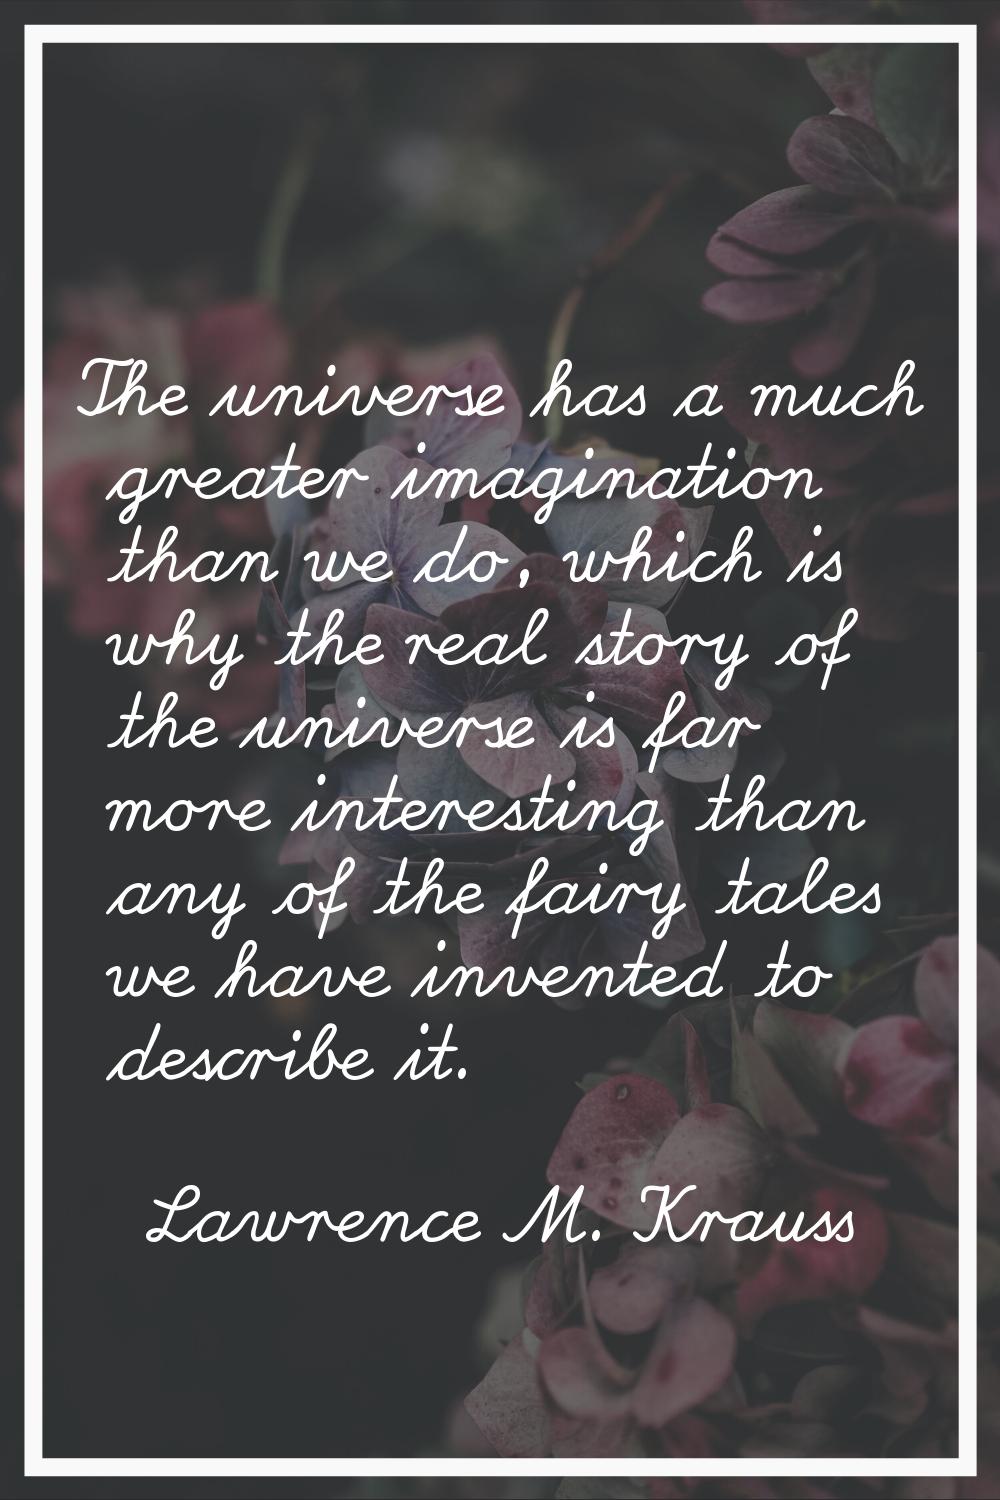 The universe has a much greater imagination than we do, which is why the real story of the universe